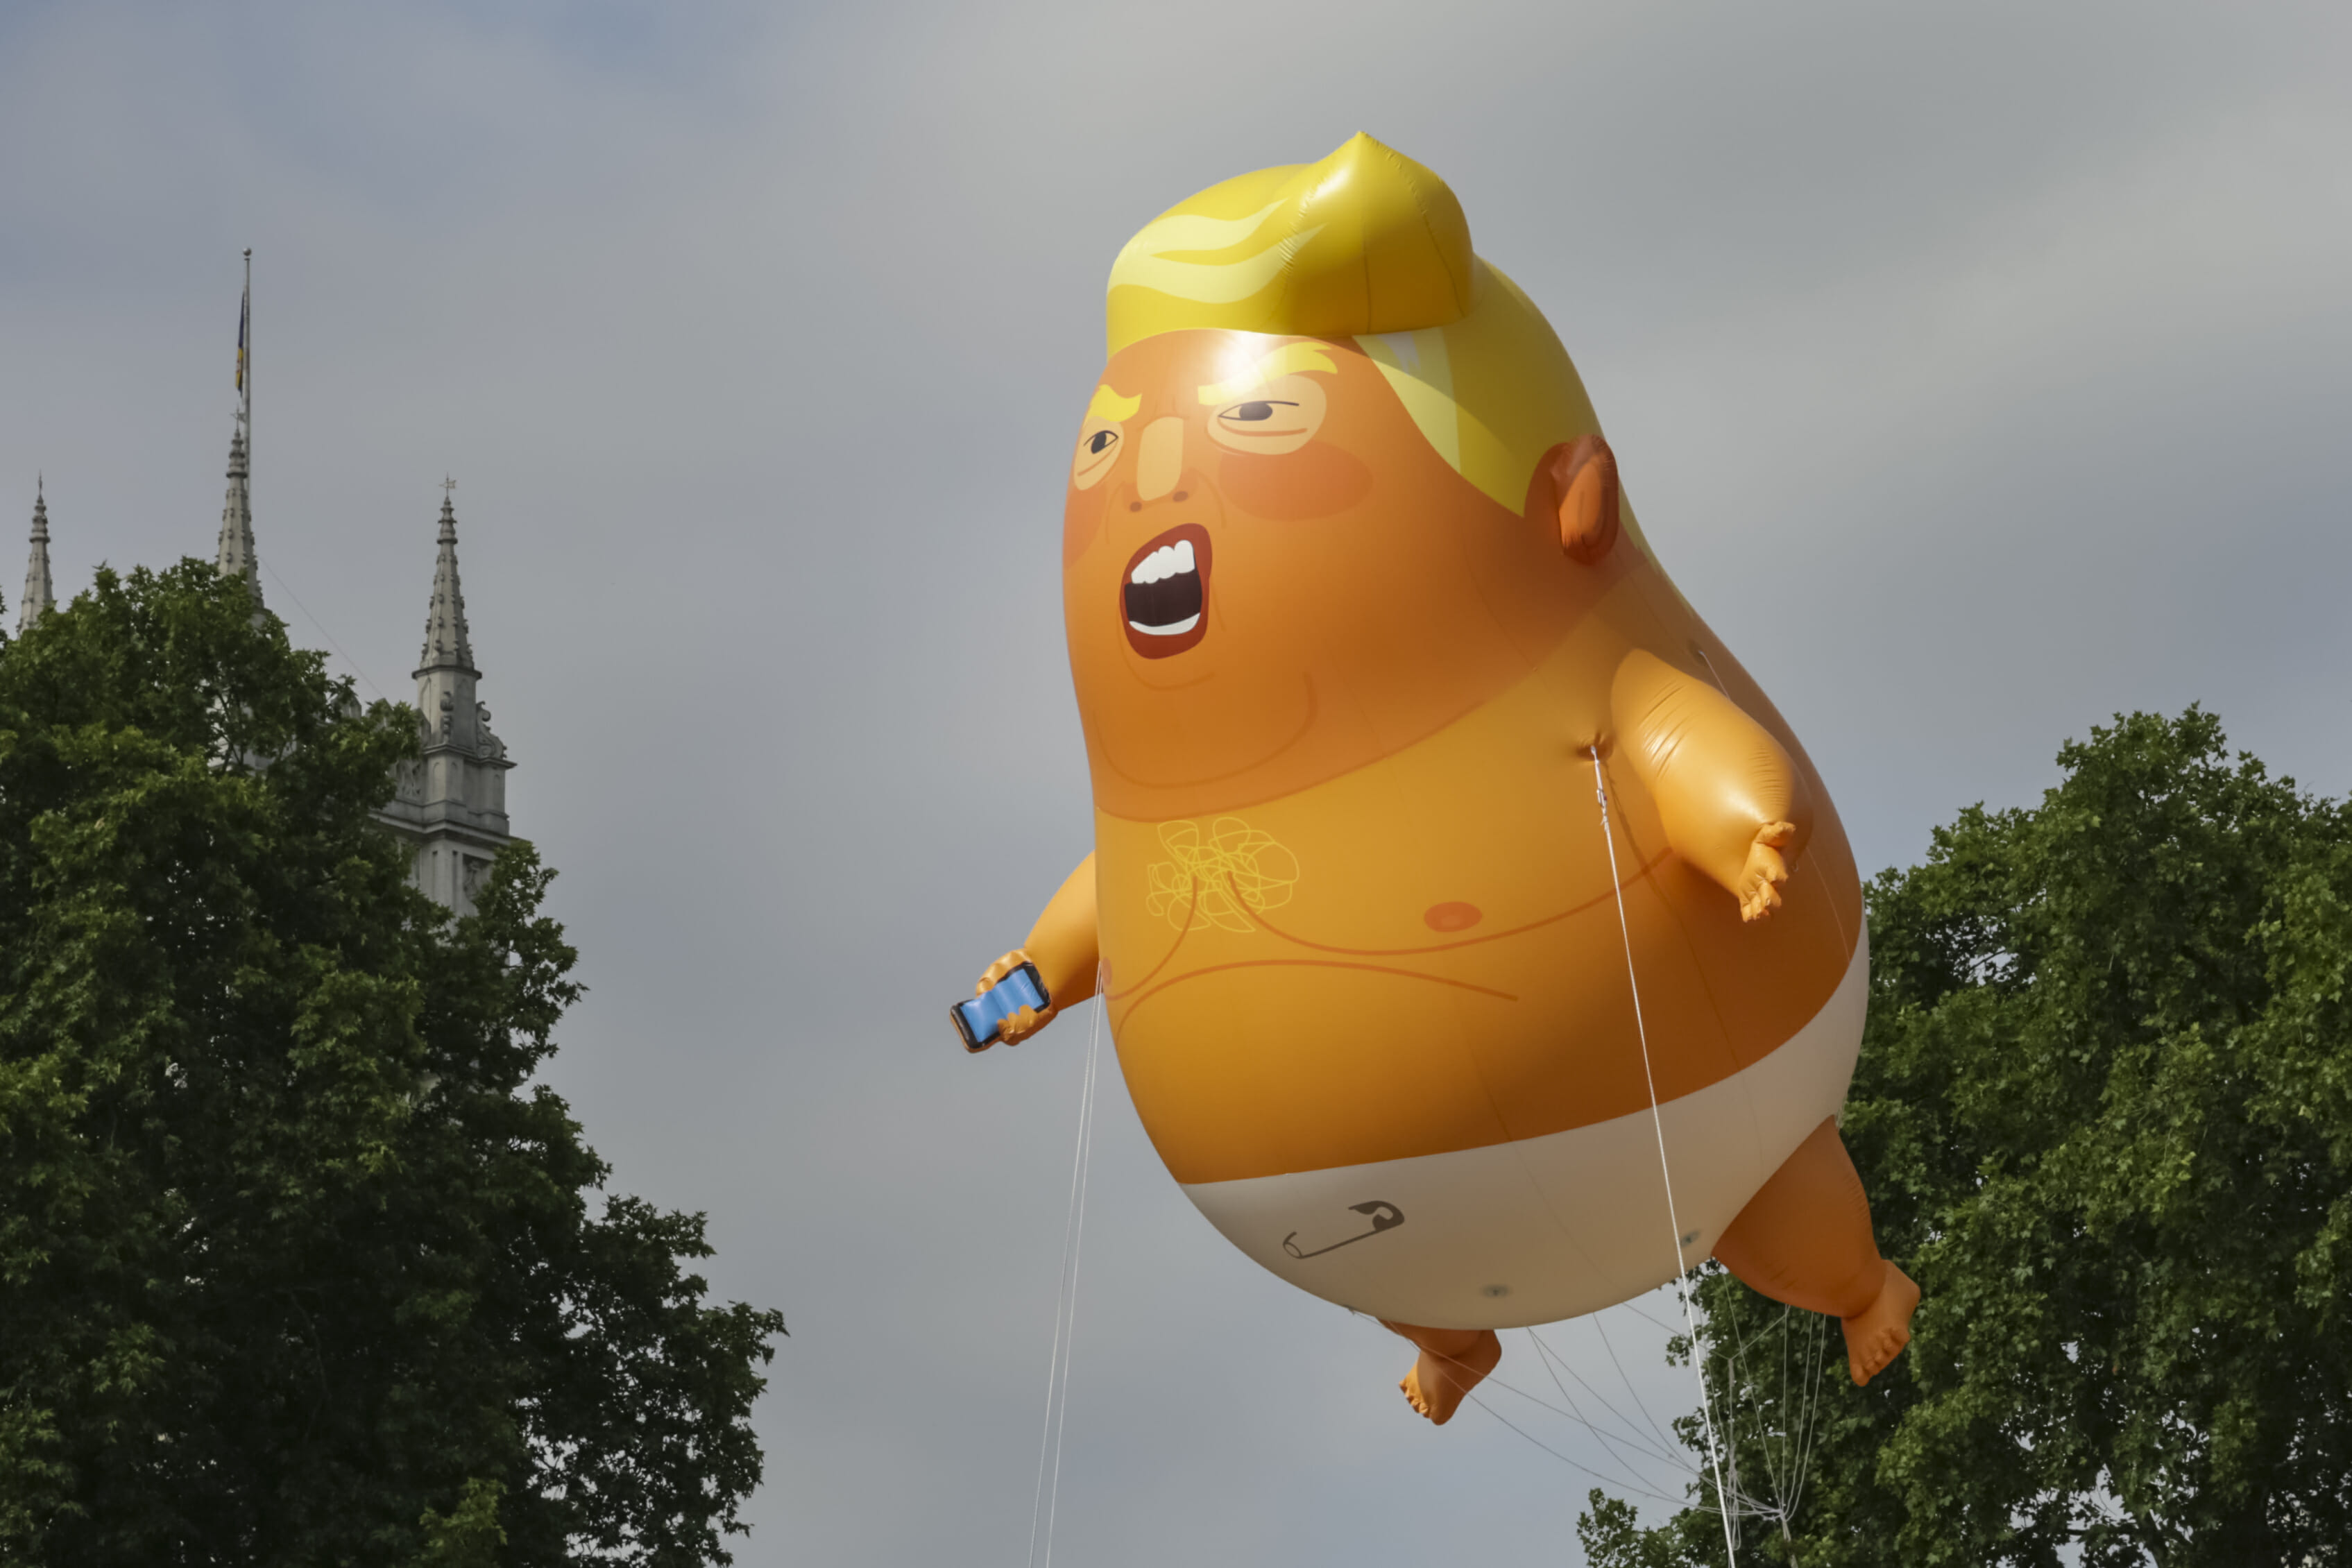 A giant baby trump balloon flies over the Parliament Square on July 13, 2018 in London, England.